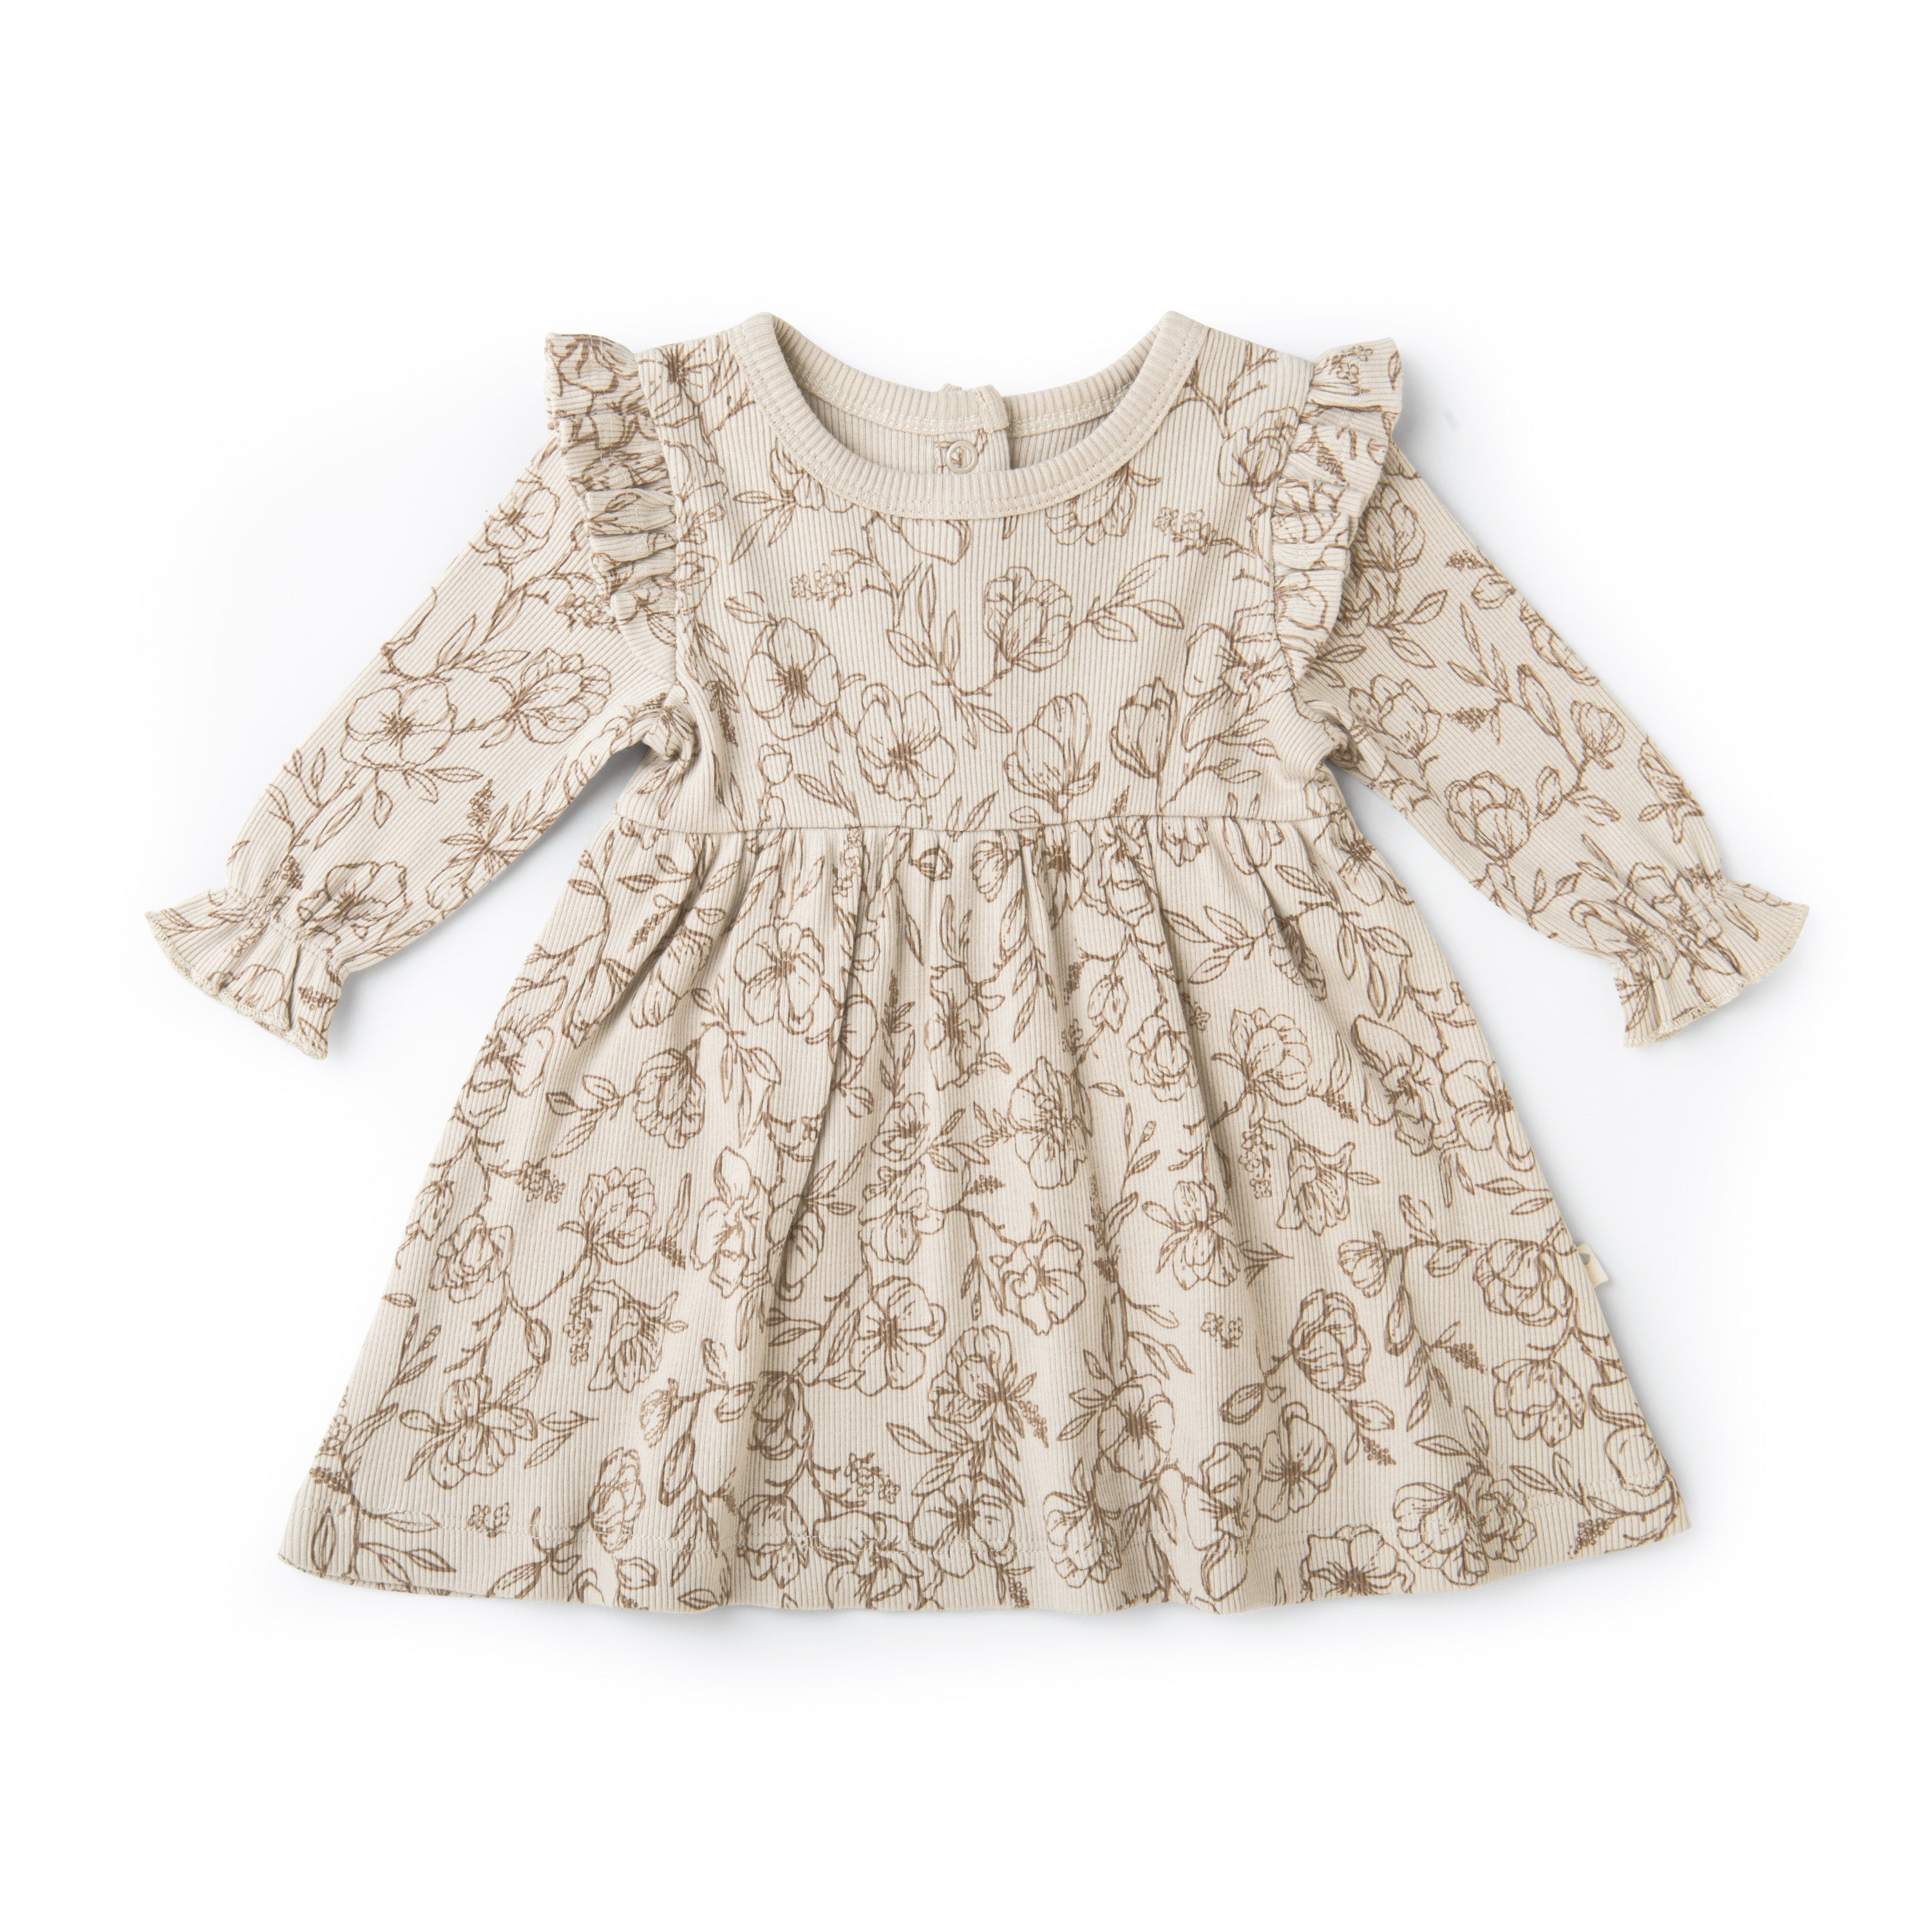 A Organic Girls beige floral-printed baby dress with long sleeves and a ribbed collar, laid flat on a white background.